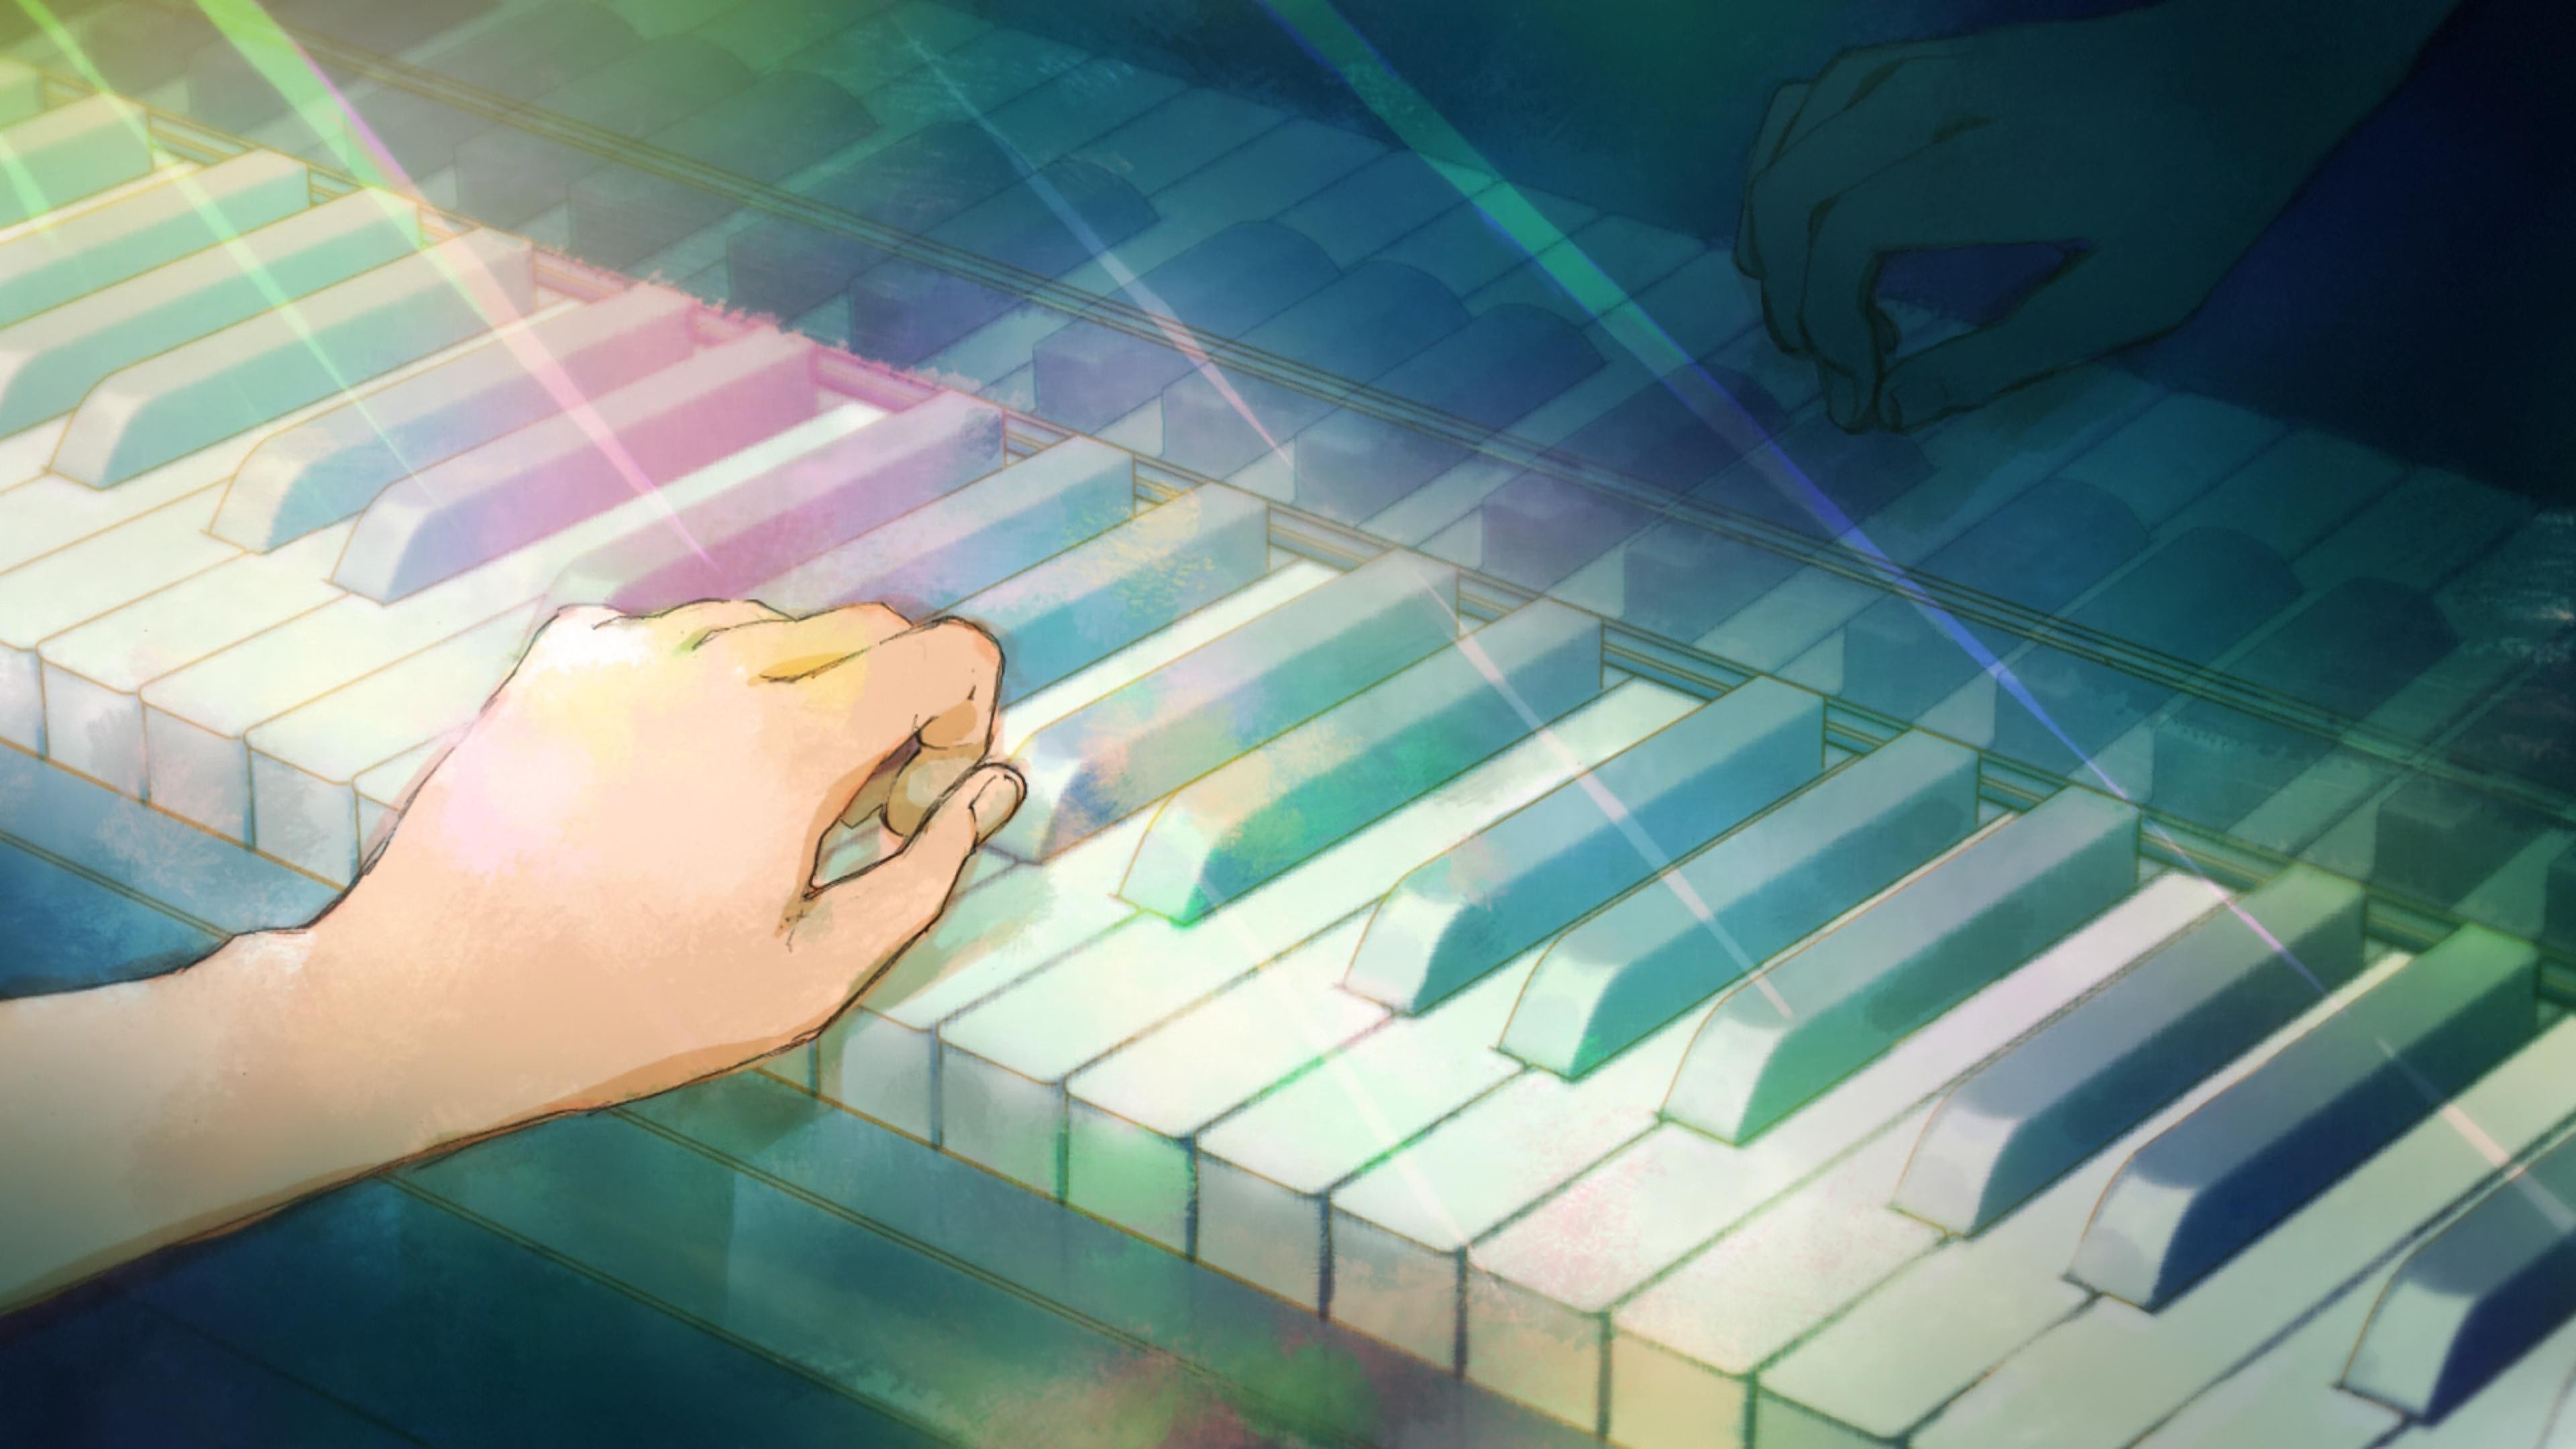 Anime 3840x2160 piano anime musical instrument hands reflection